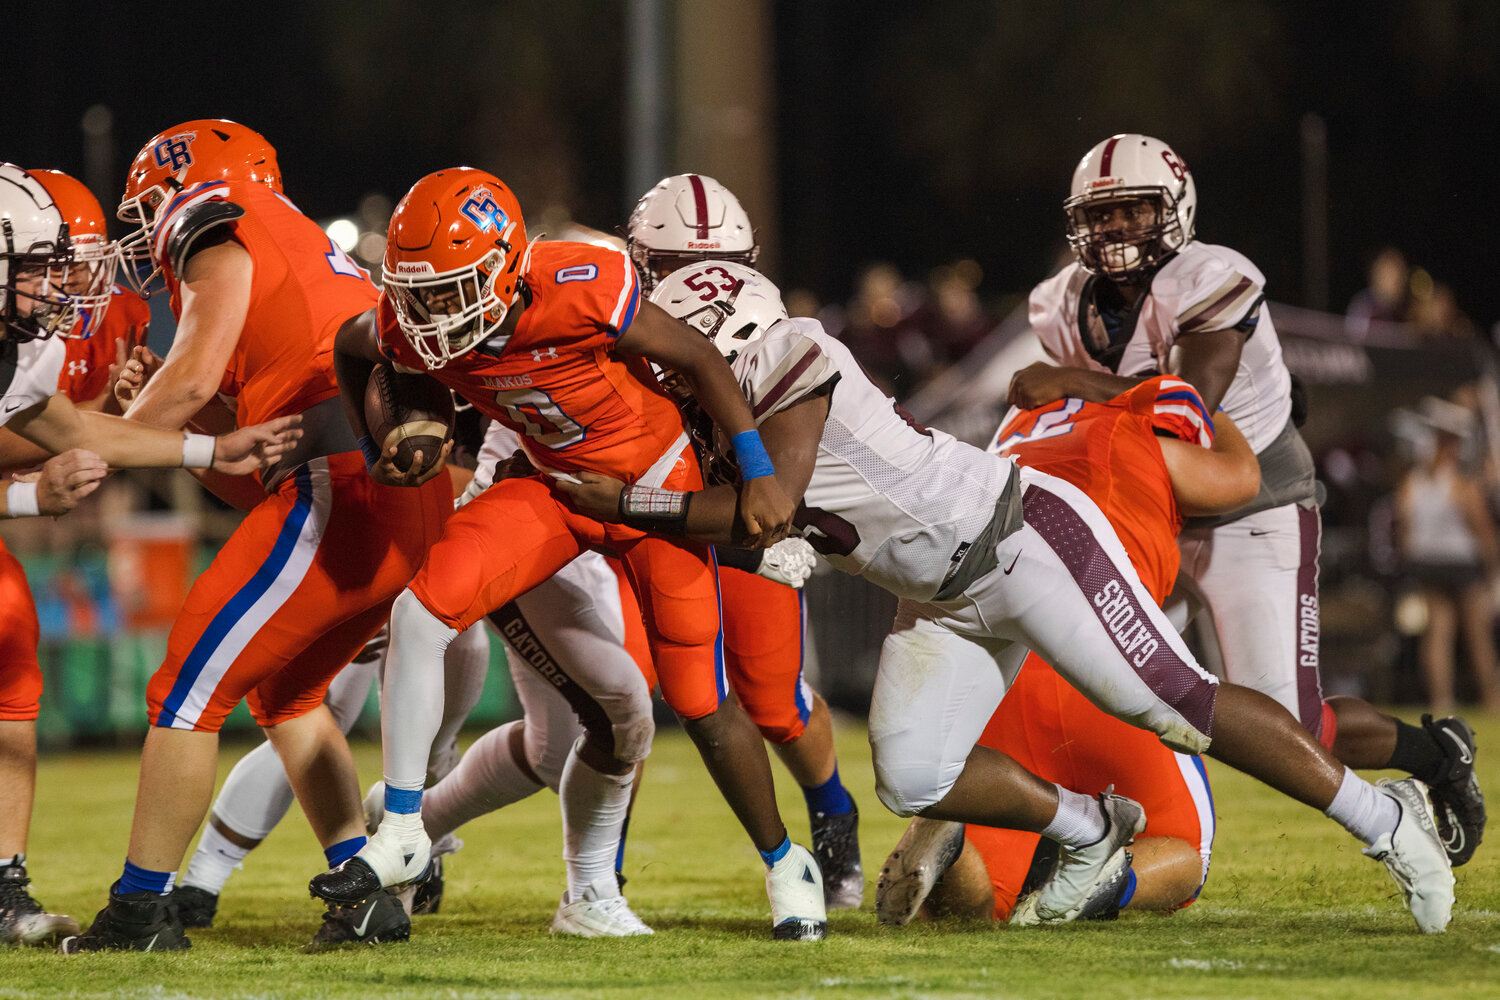 Orange Beach senior Shamar Lowe tries to shed a Satsuma tackler during the Makos’ home game against the Gators in Class 4A Region 1 action Friday night at the Orange Beach Sportsplex. Satsuma secured a 17-15 win and Orange Beach is set for an away game against the T.R. Miller Tigers in Week 5.